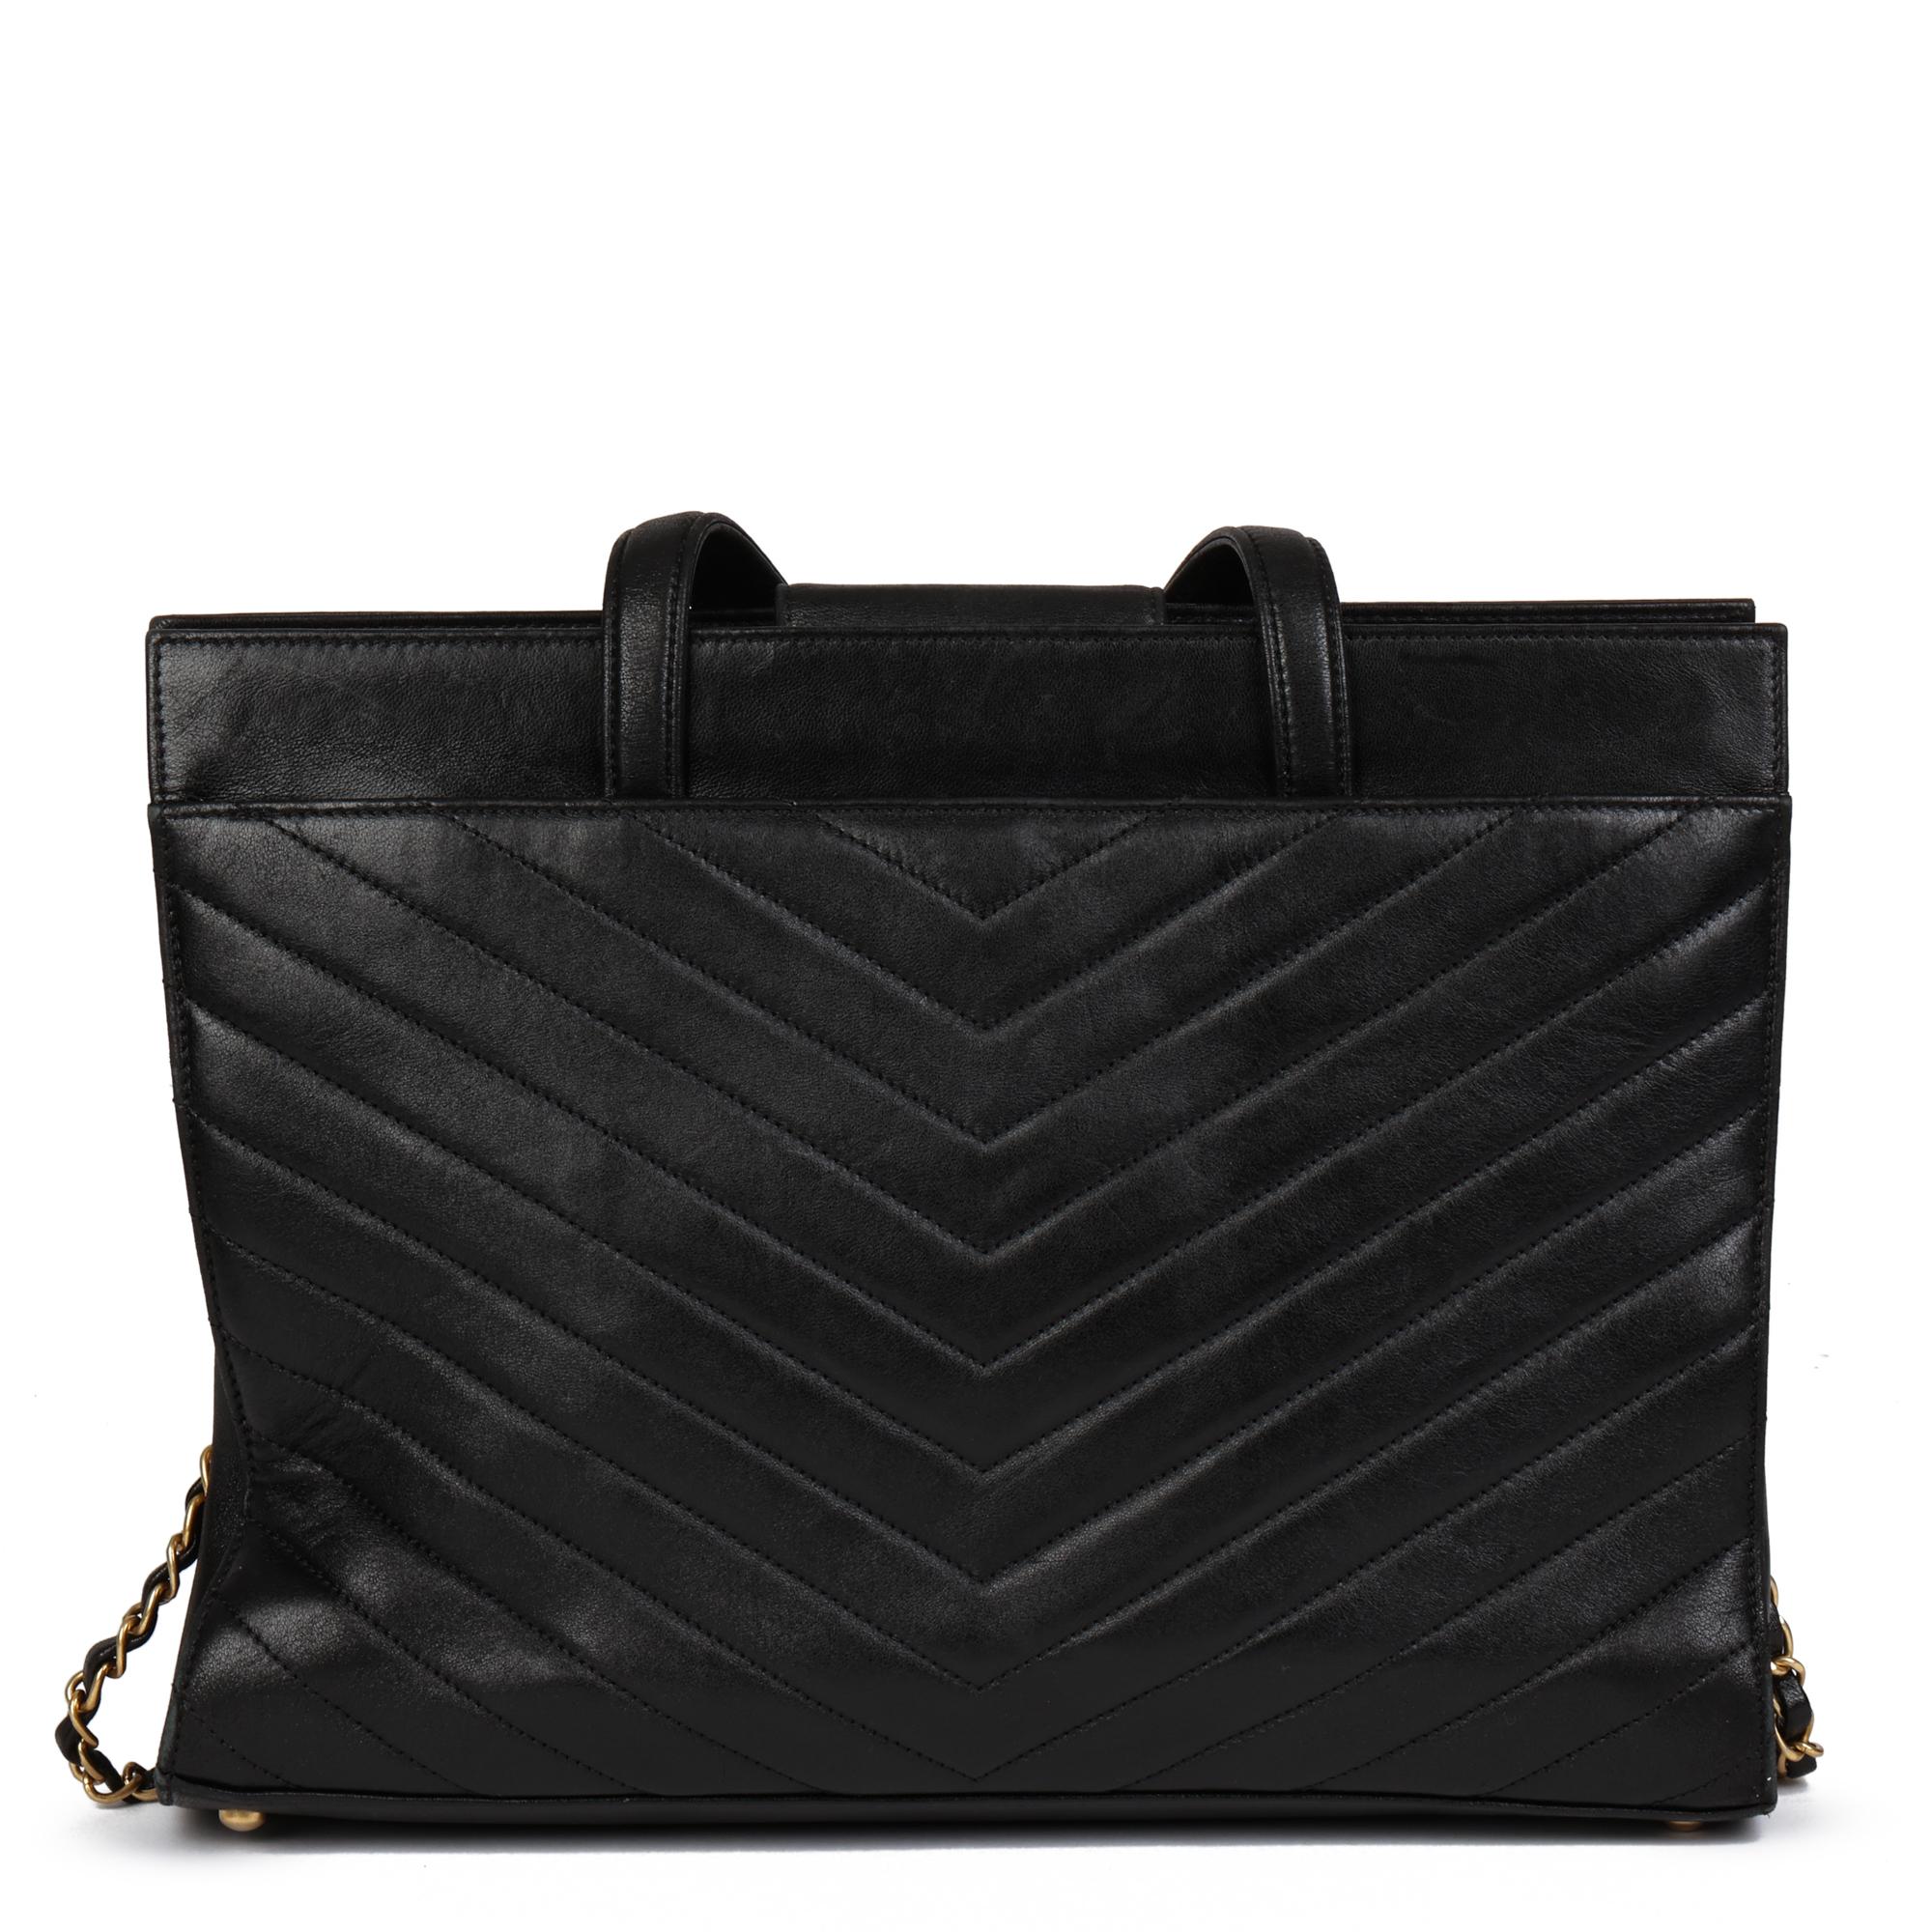 CHANEL Black Chevron Quilted Lambskin Classic Shoulder Tote 1